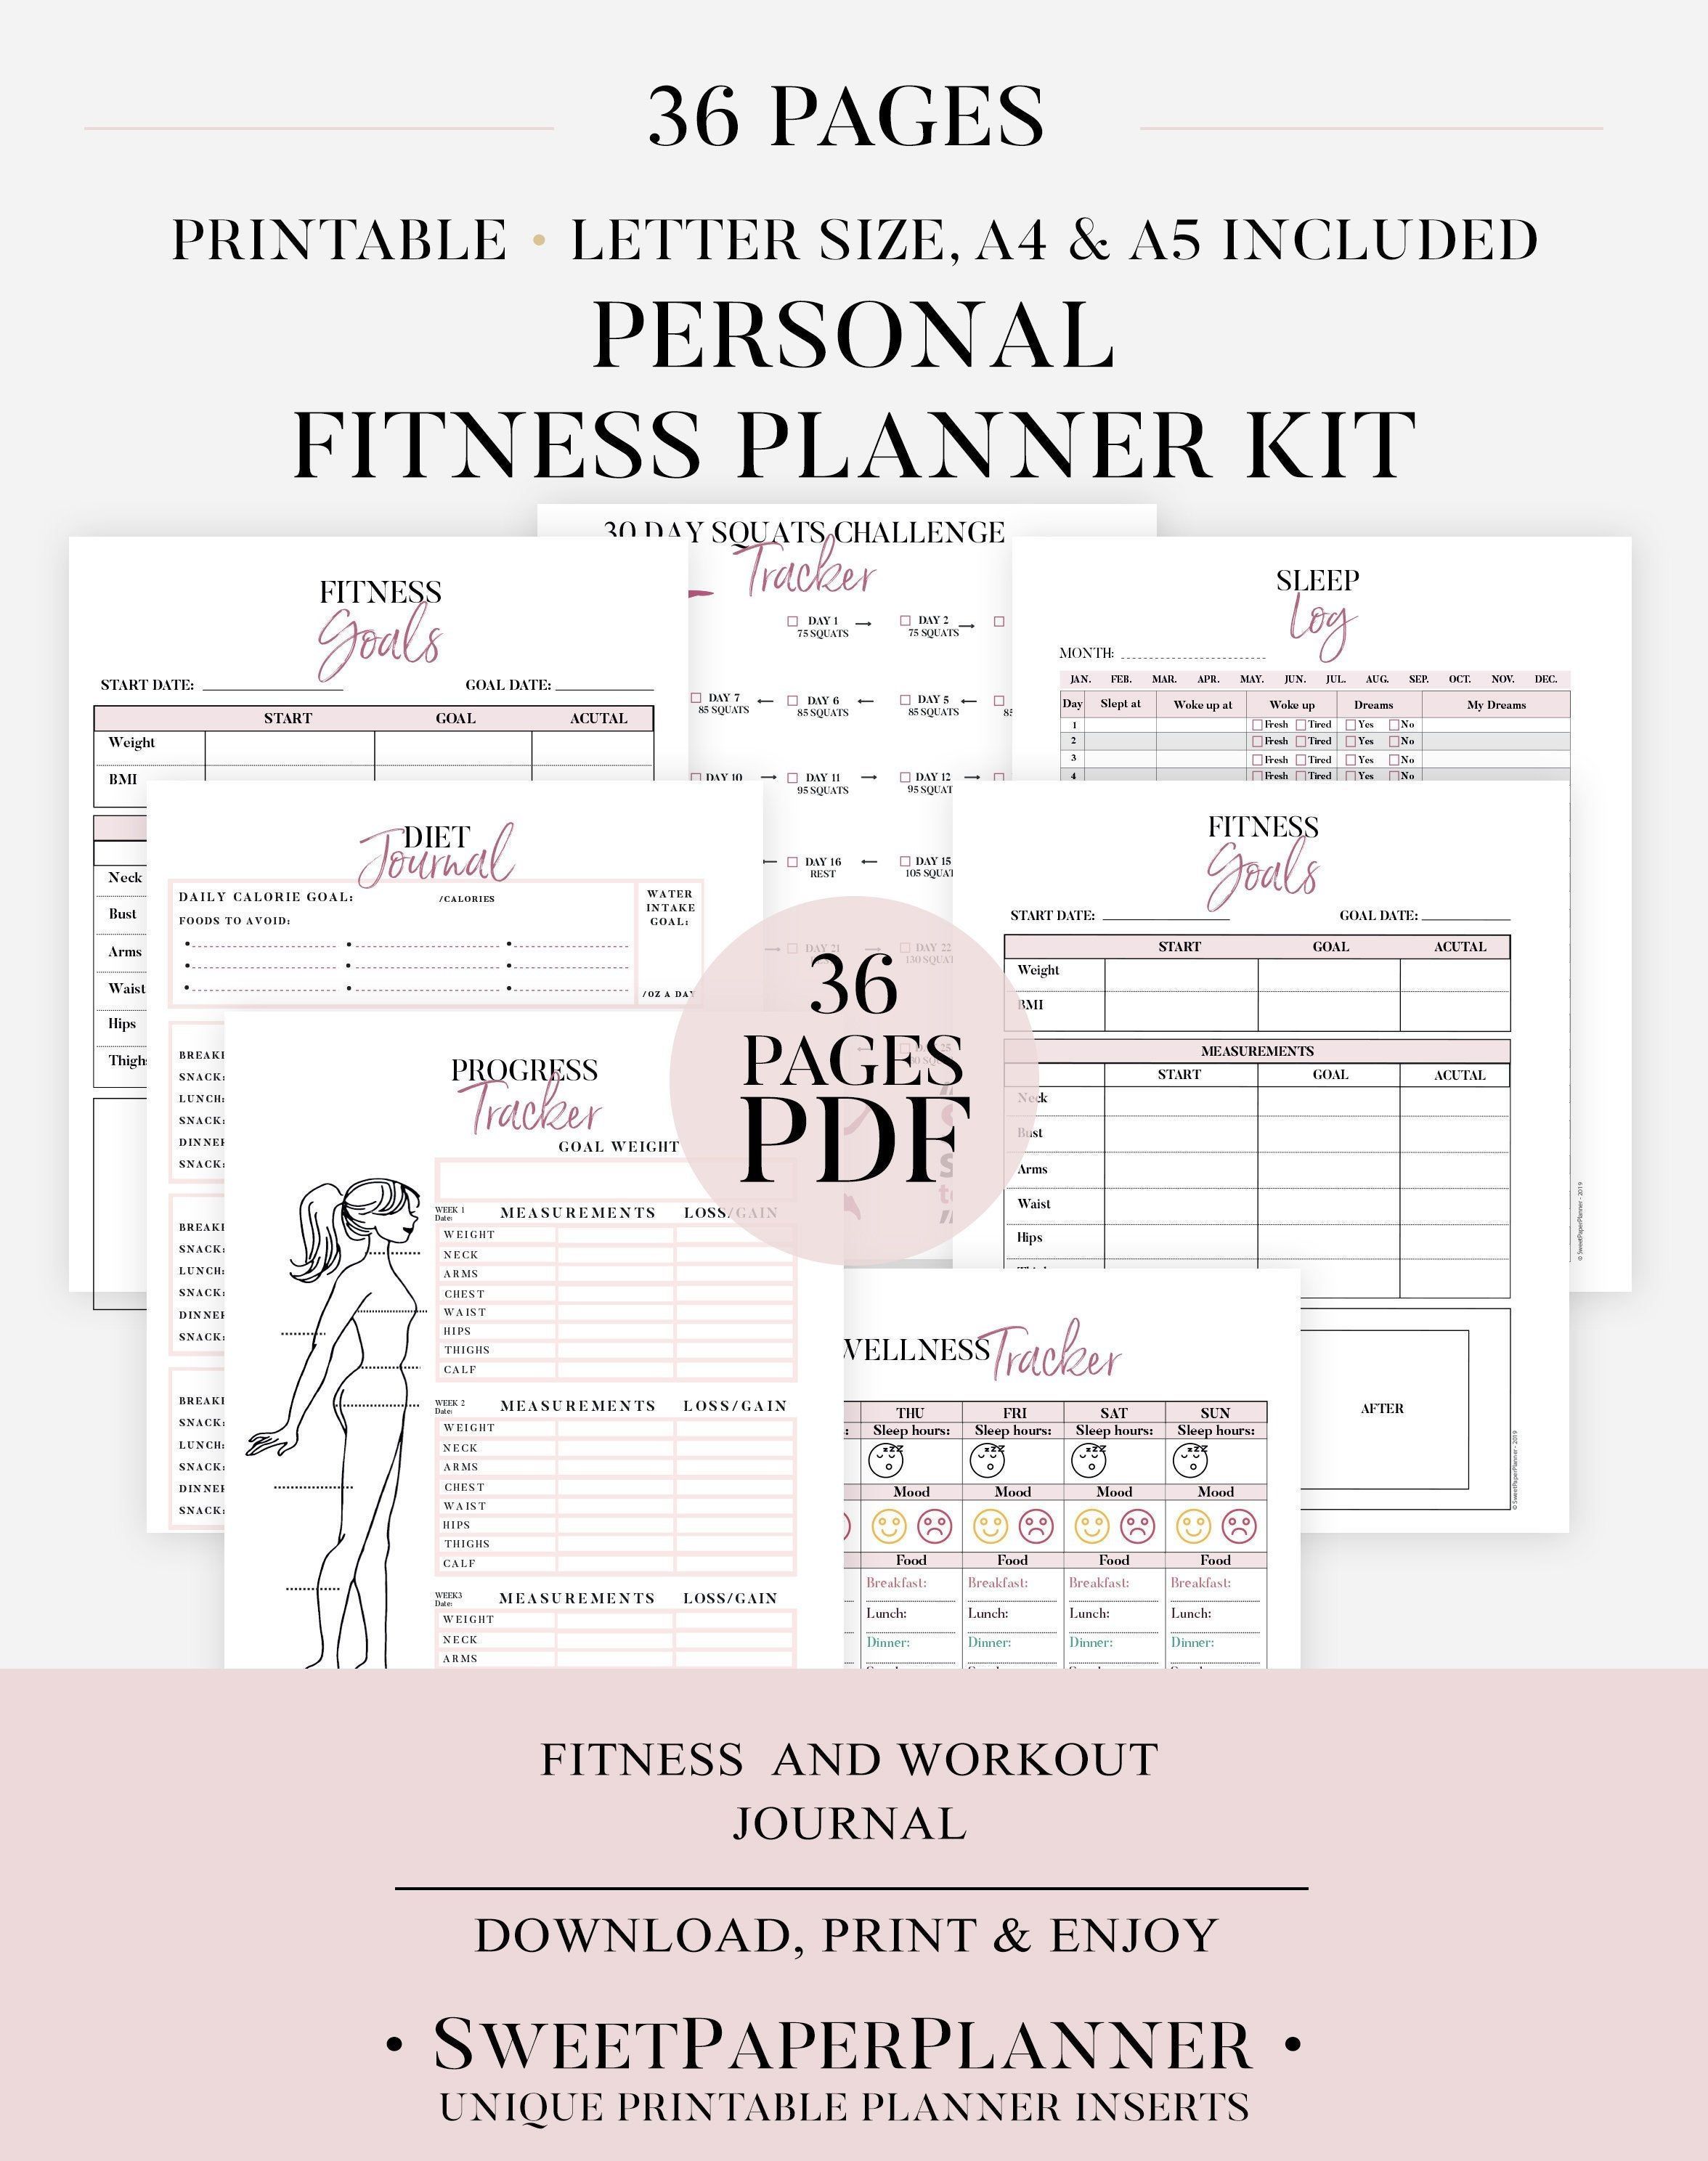 Ultimate Fitness Planner, Printable Health planner Bundle, Fitness Journal, Workout Log, Food And Exercise Tracker, 30 Day Squats Challenge -   15 fitness Tracker measurements ideas